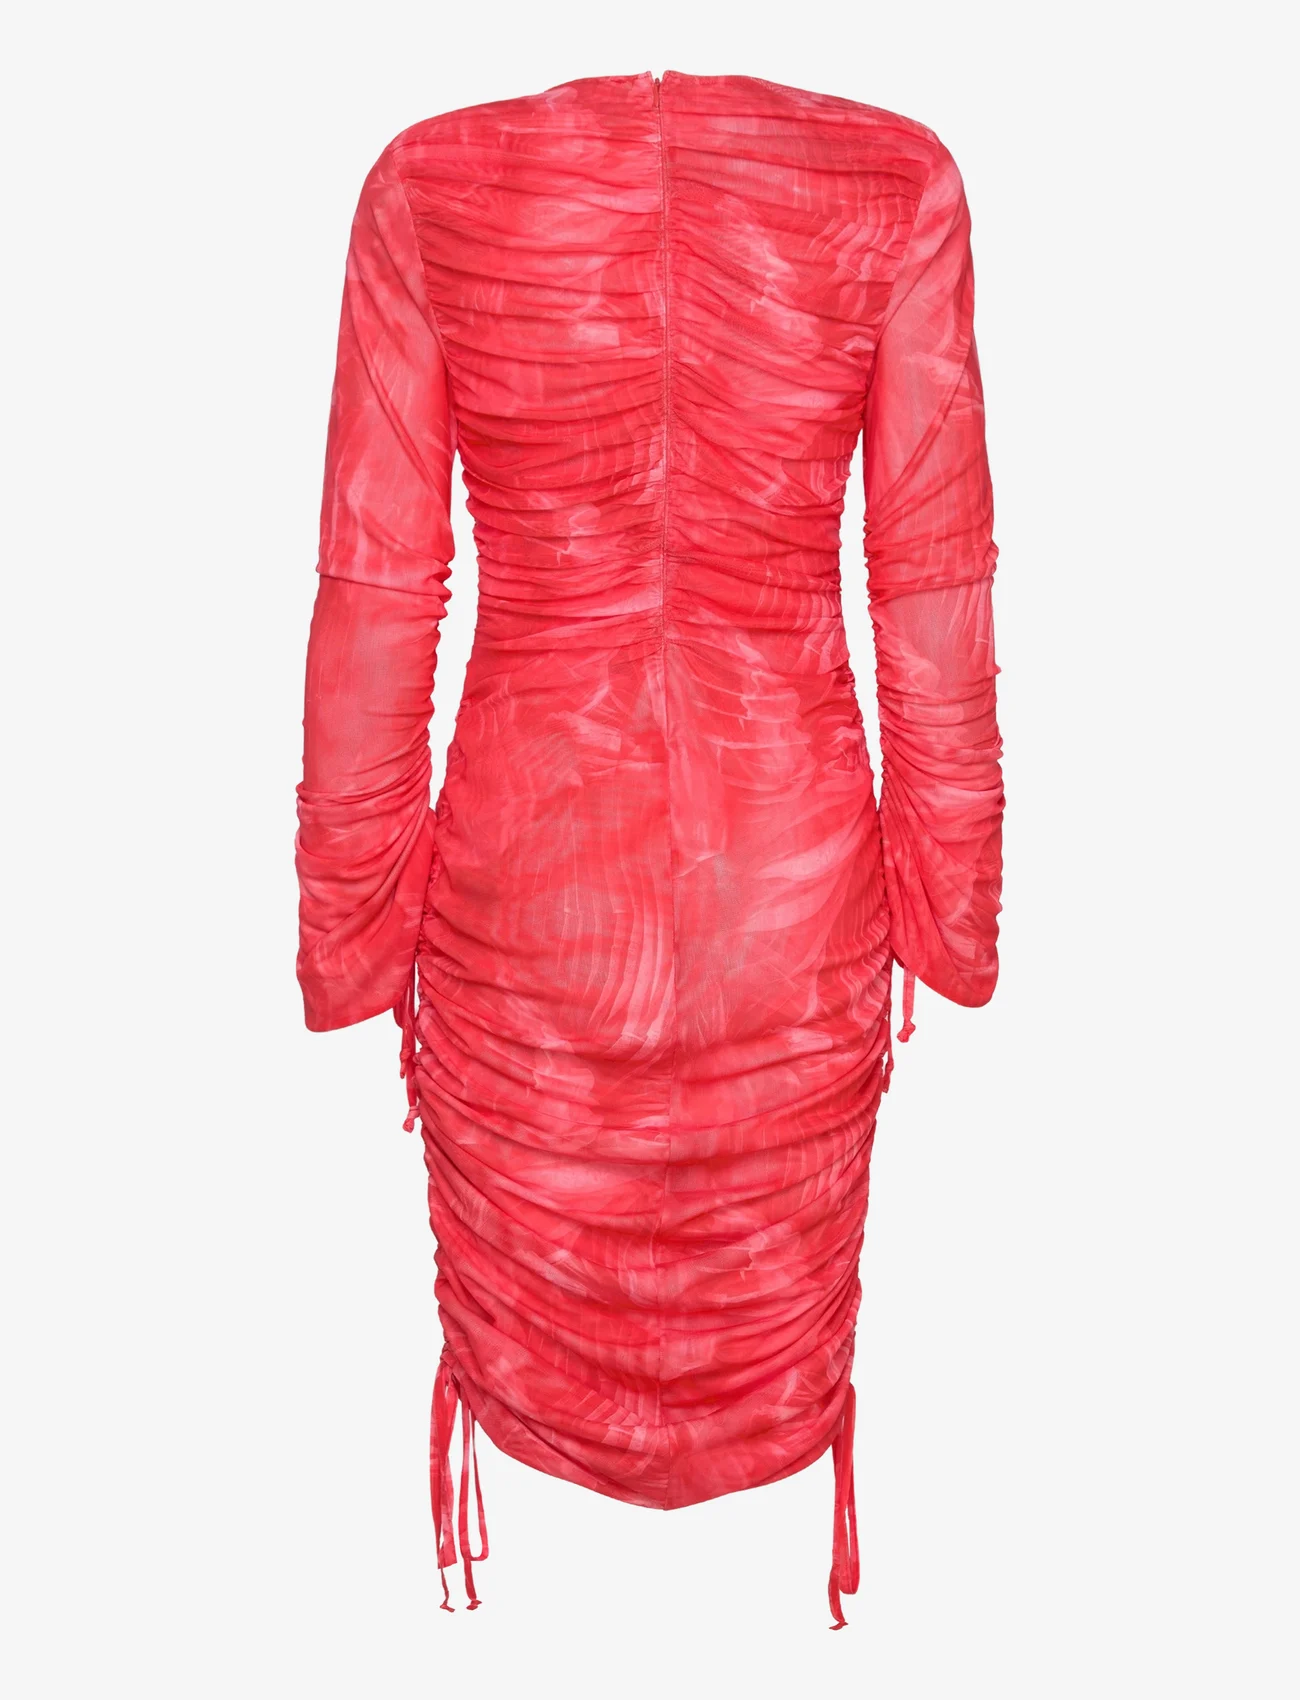 Cannari Concept - Ls Dress W. Ruffles - peoriided outlet-hindadega - true red - 1